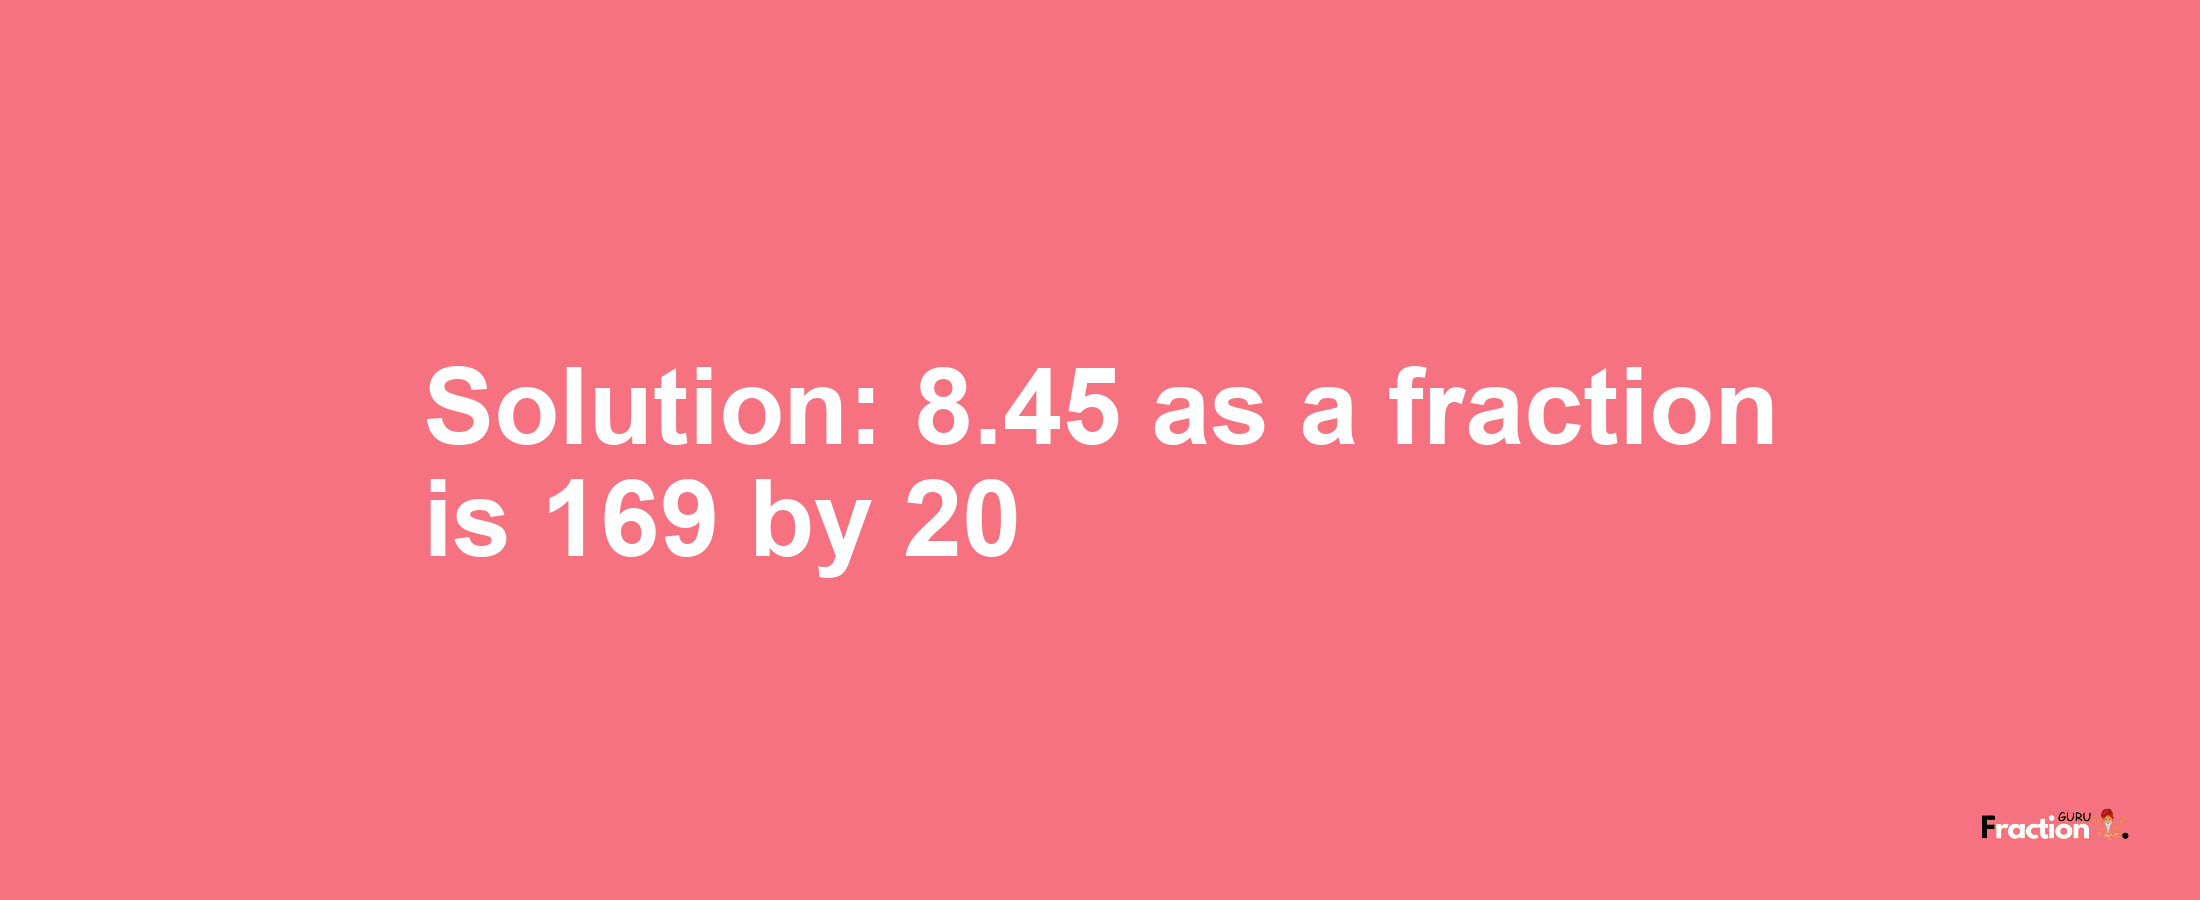 Solution:8.45 as a fraction is 169/20